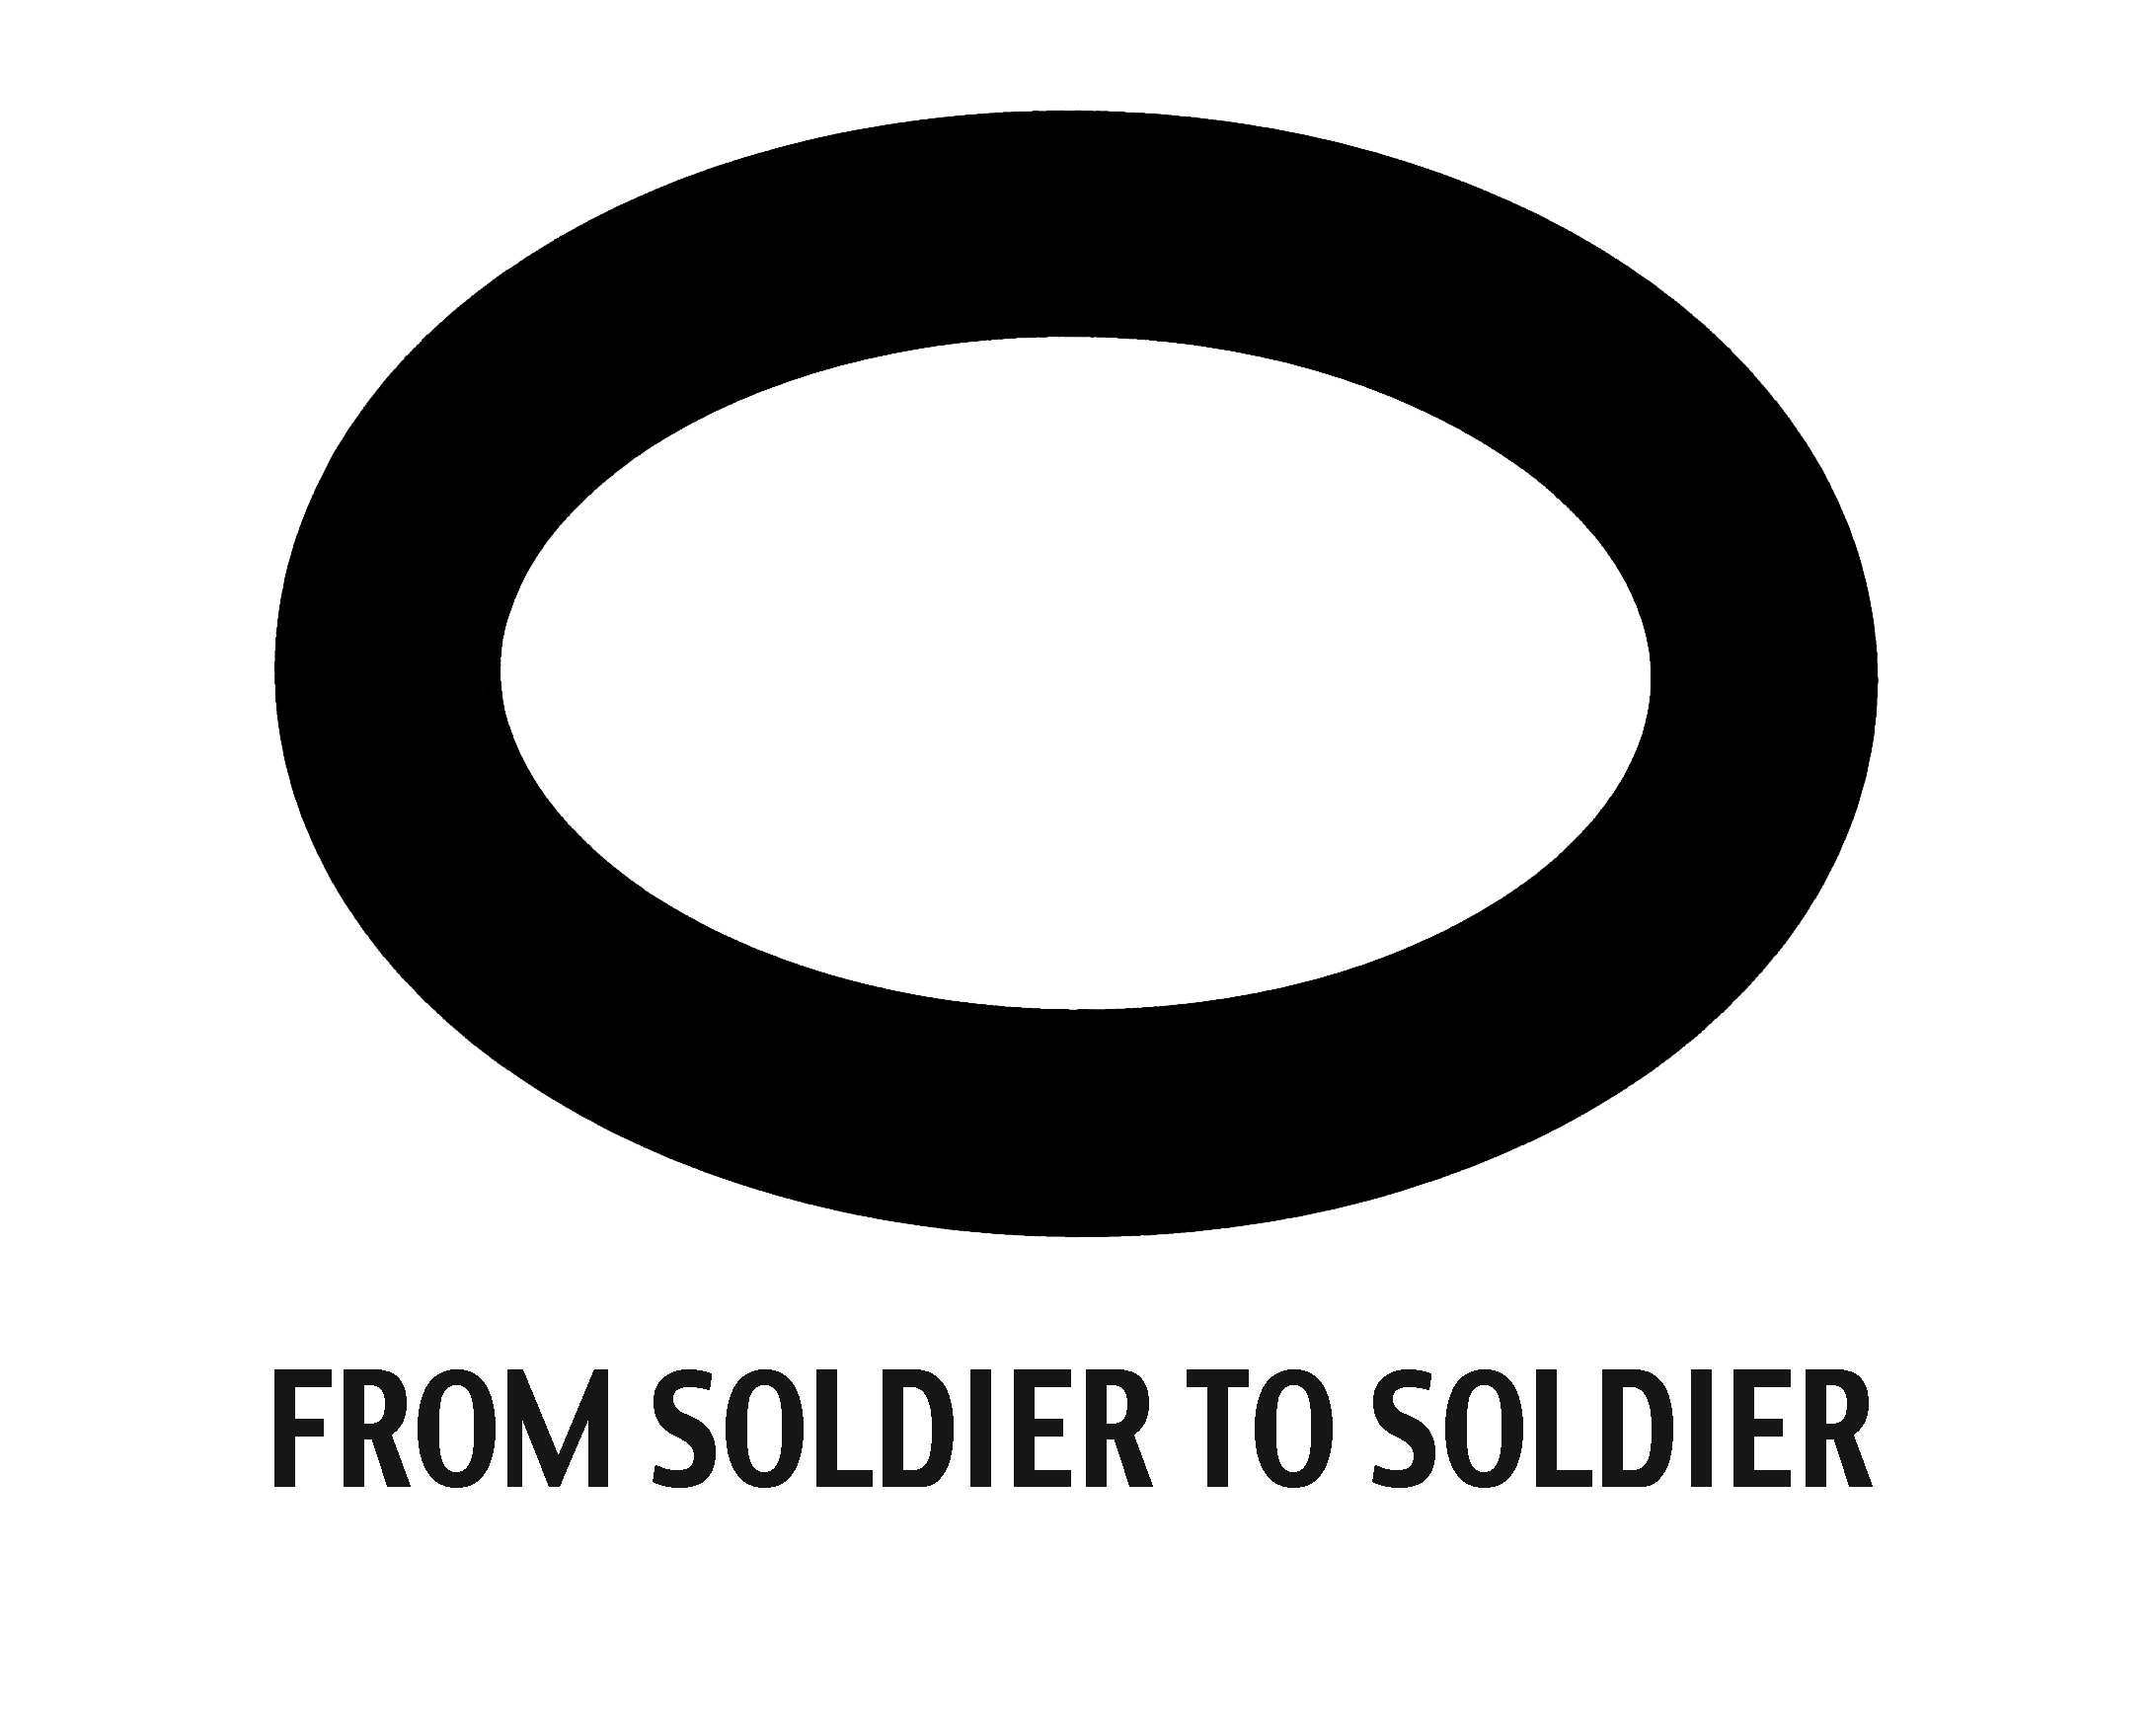 From soldier to soldier